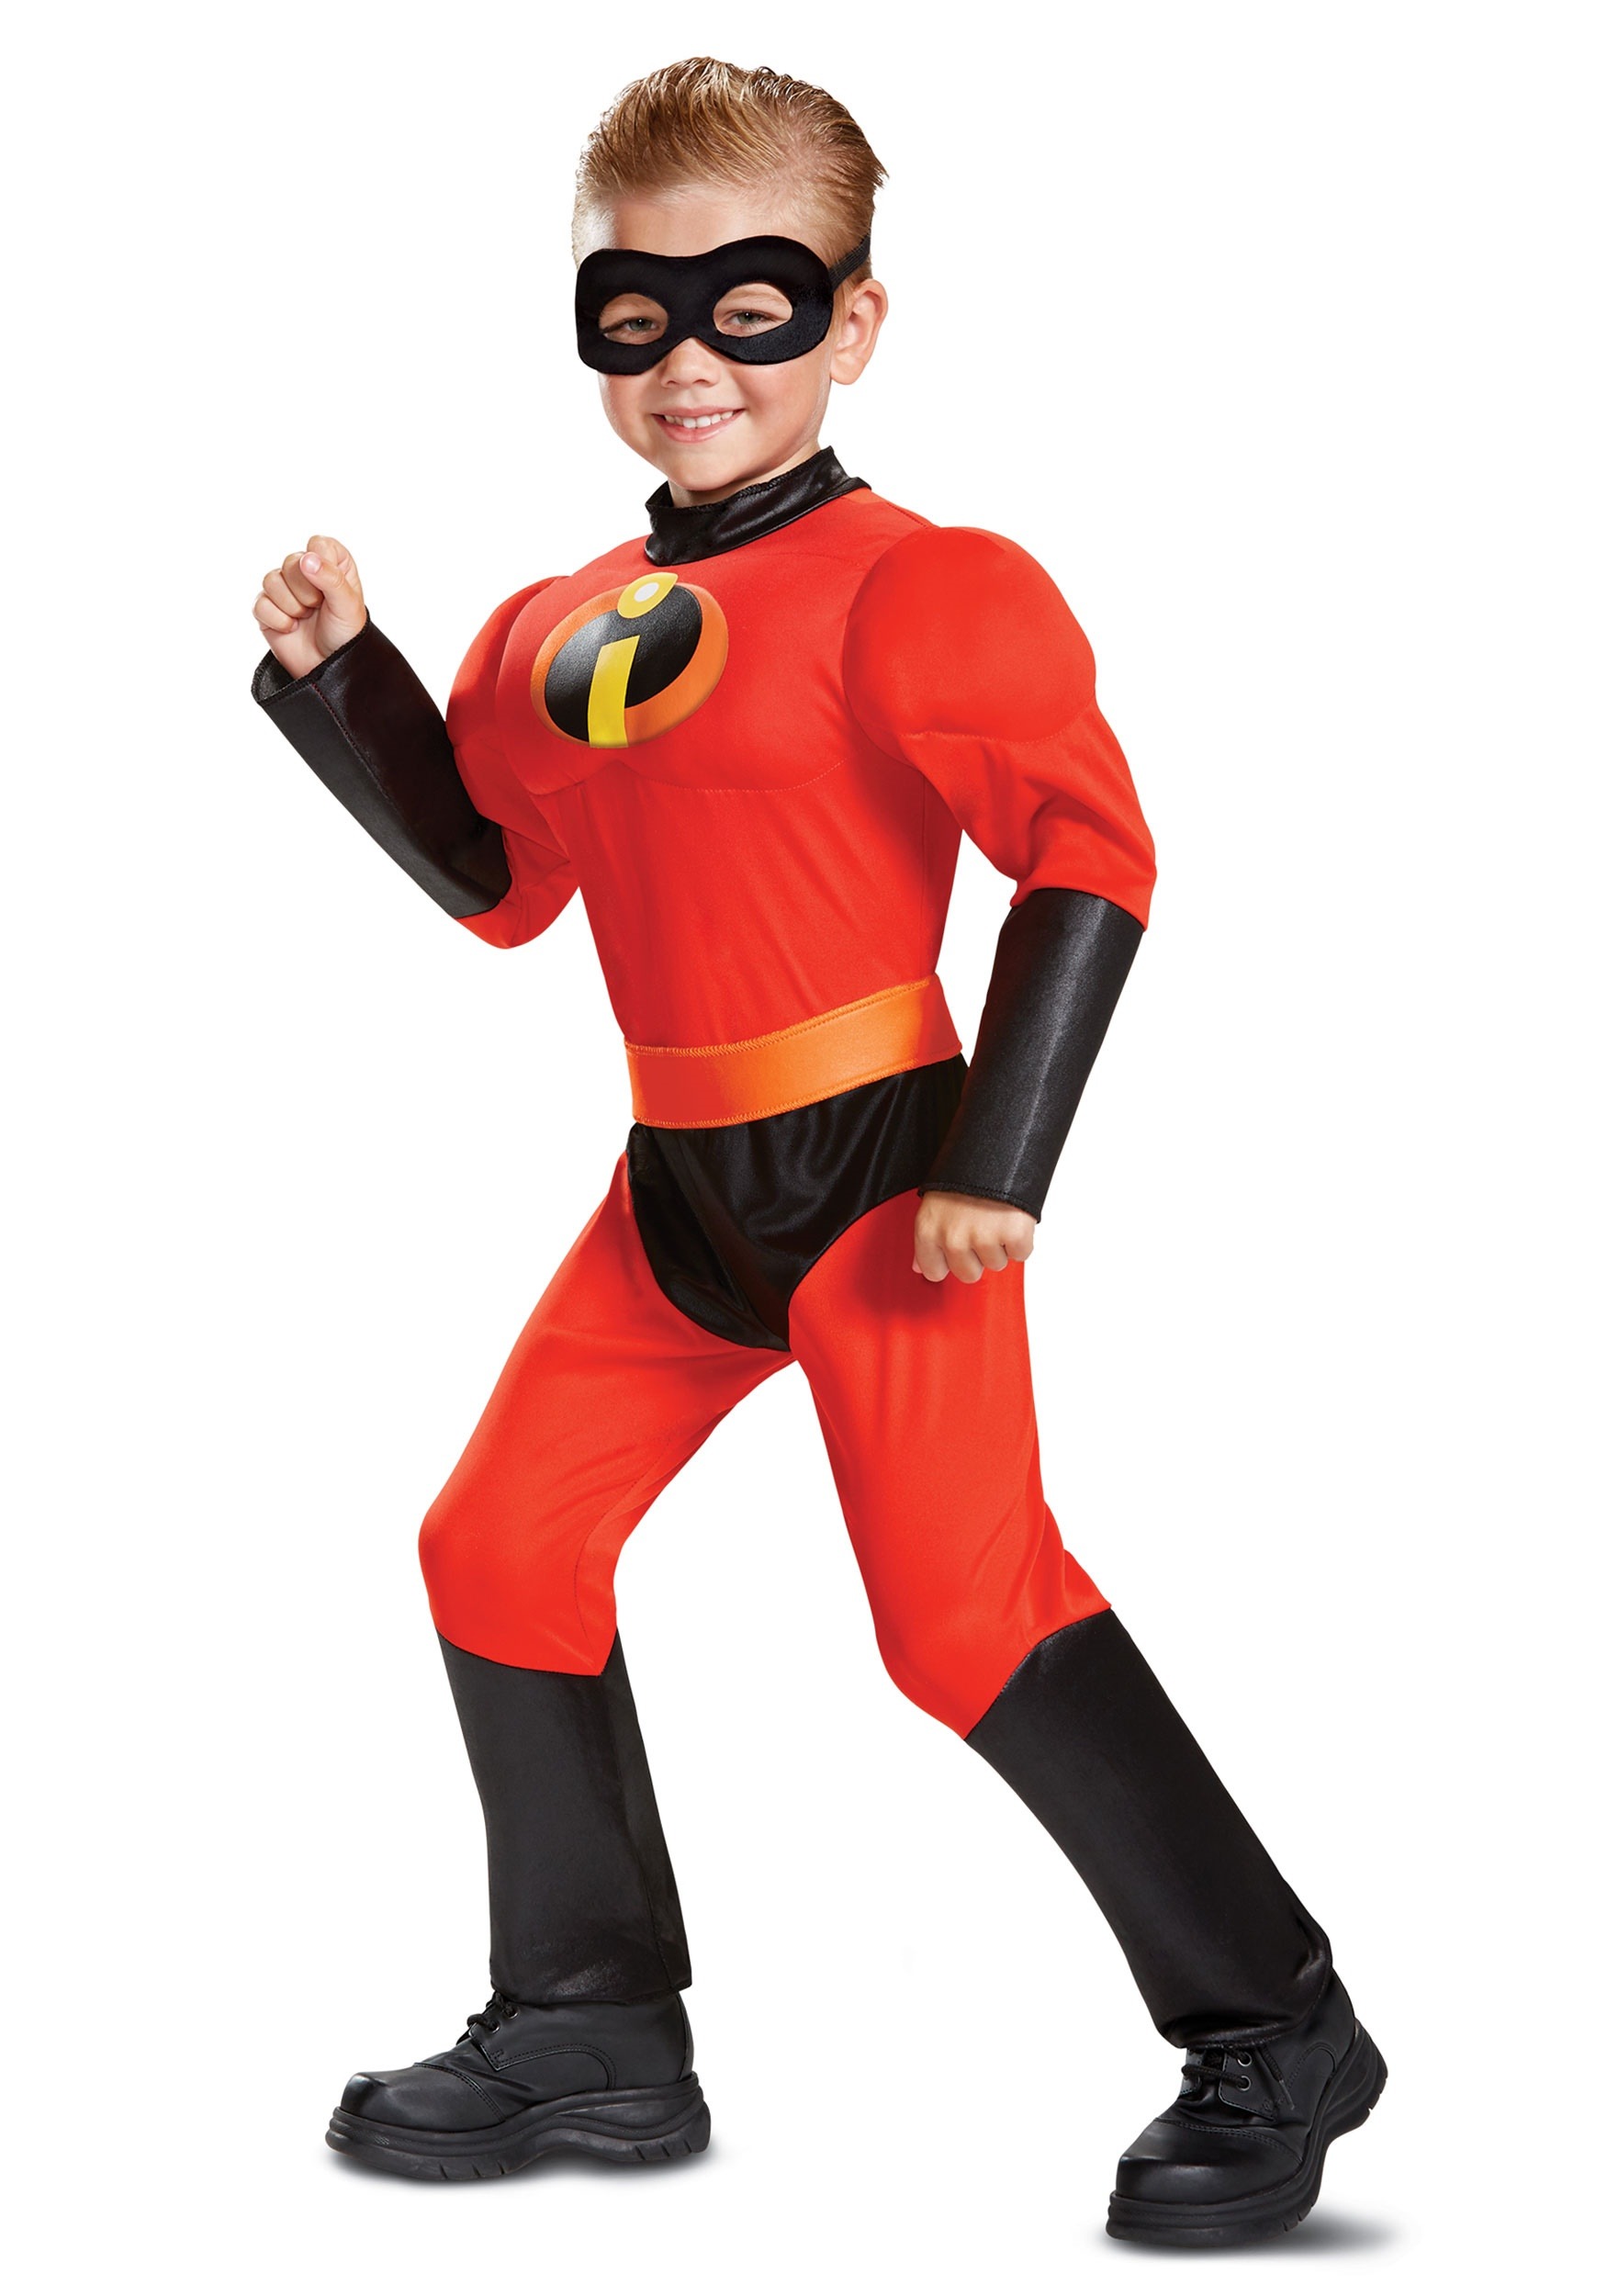 Photos - Fancy Dress Disney Disguise  Incredibles 2 Classic Dash Muscle Costume for Toddlers Bla 